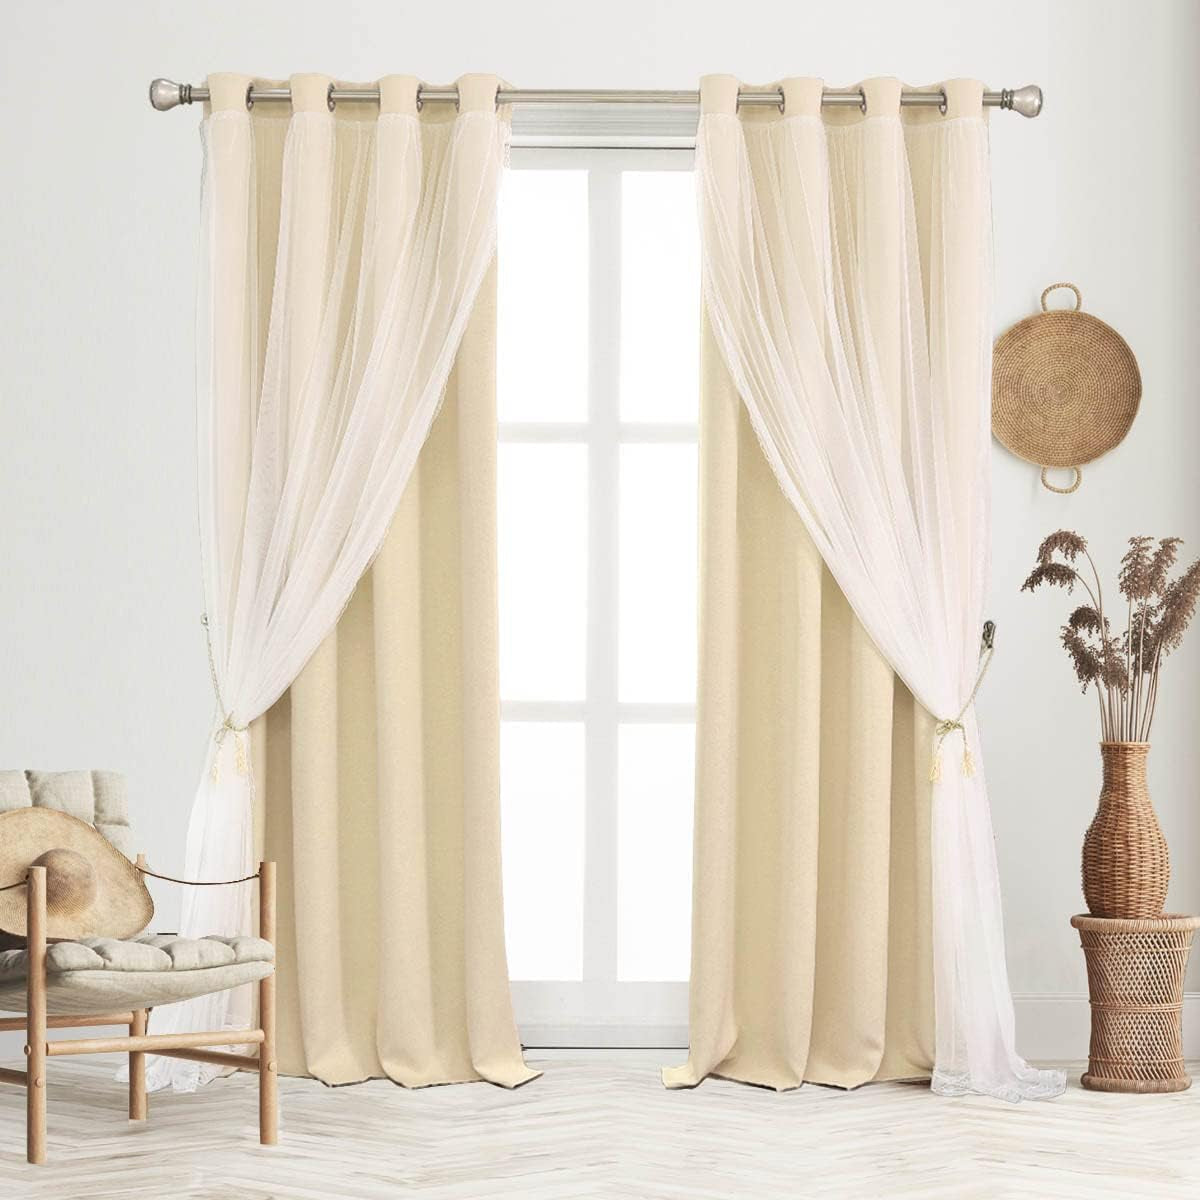 Pink Blackout Curtains 84 Inch Length - Double Layers Princess Girls Curtains & Draperies Panels for Kids Bedroom Living Room Nursery Pink Lace Hem Room Darkening Curtains, 2 Pcs  SOFJAGETQ Biscotti Beige 52 X 96 